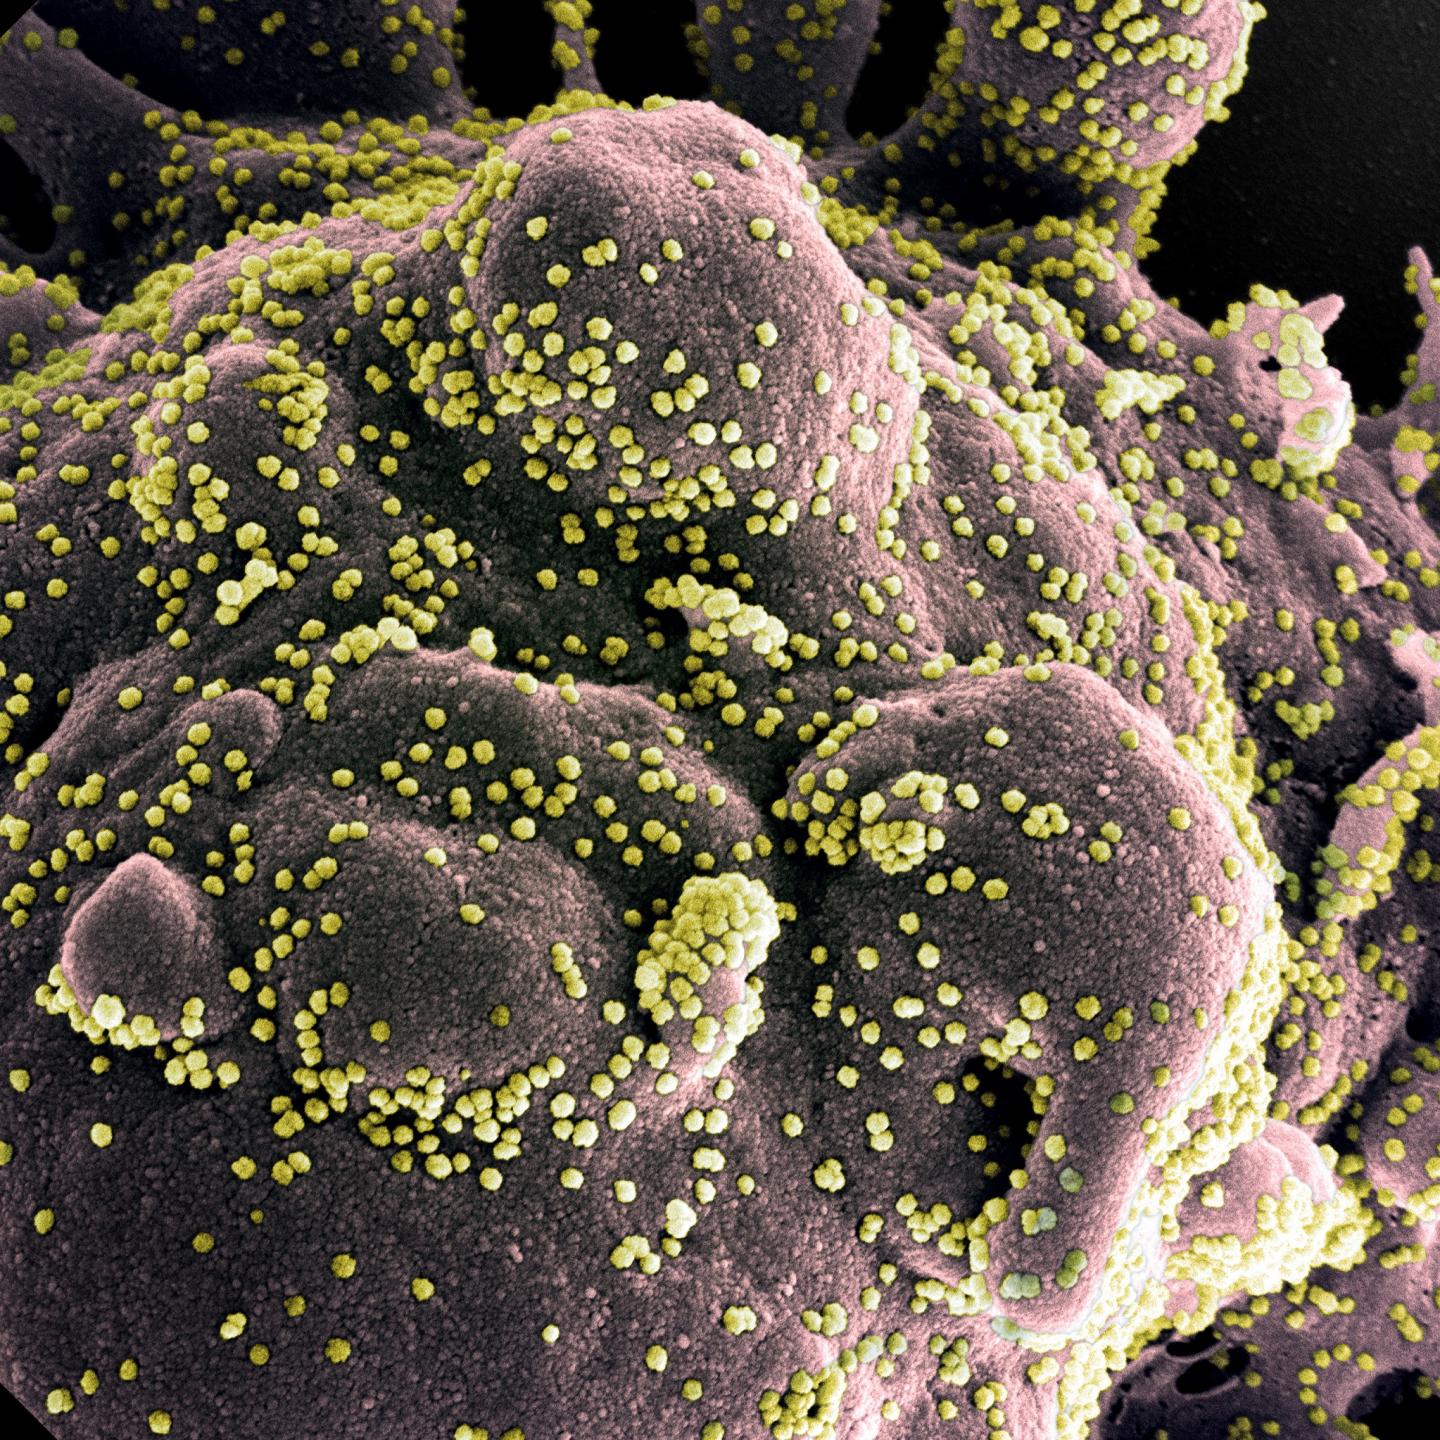 A transmission electron micrograph showing SARS-CoV-2 virus particles